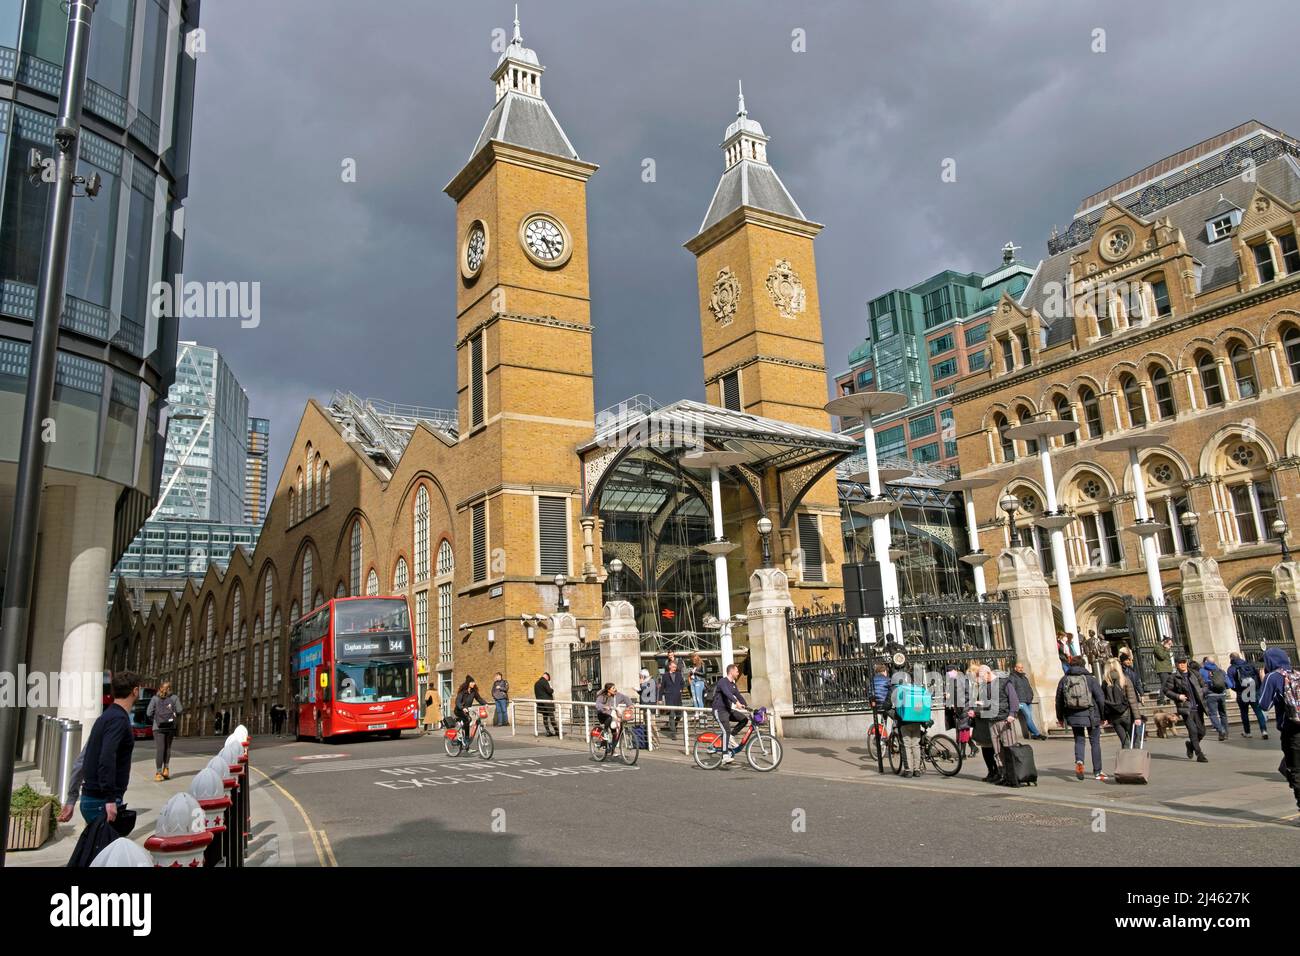 Exterior view of people travellers outside Liverpool Street Station in East London EC2 post pandemic streets in England UK spring 2022   KATHY DEWITT Stock Photo